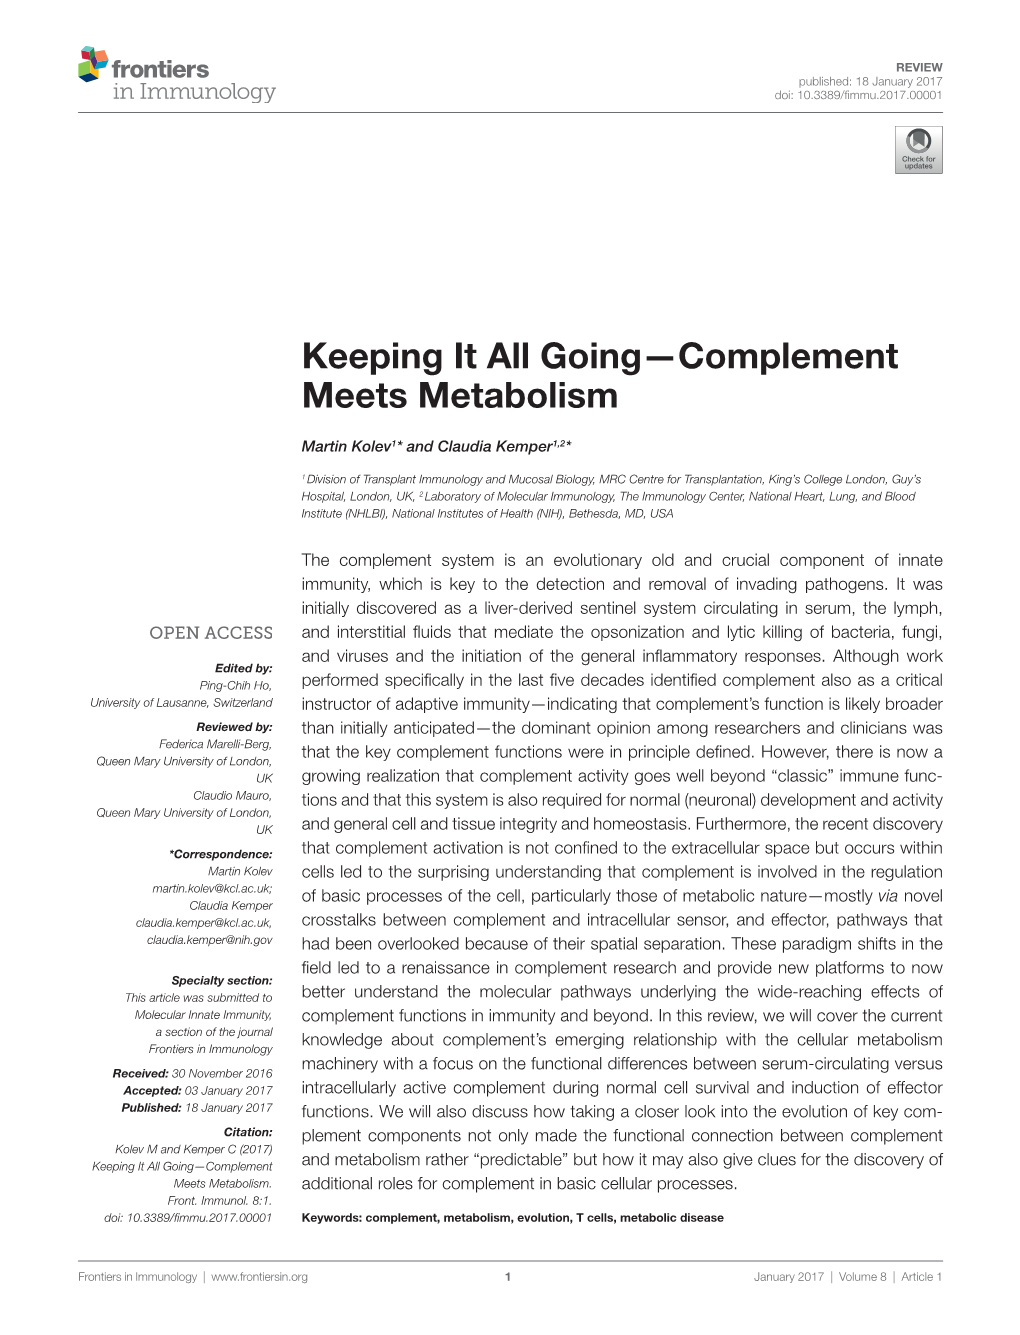 Keeping It All Going—Complement Meets Metabolism